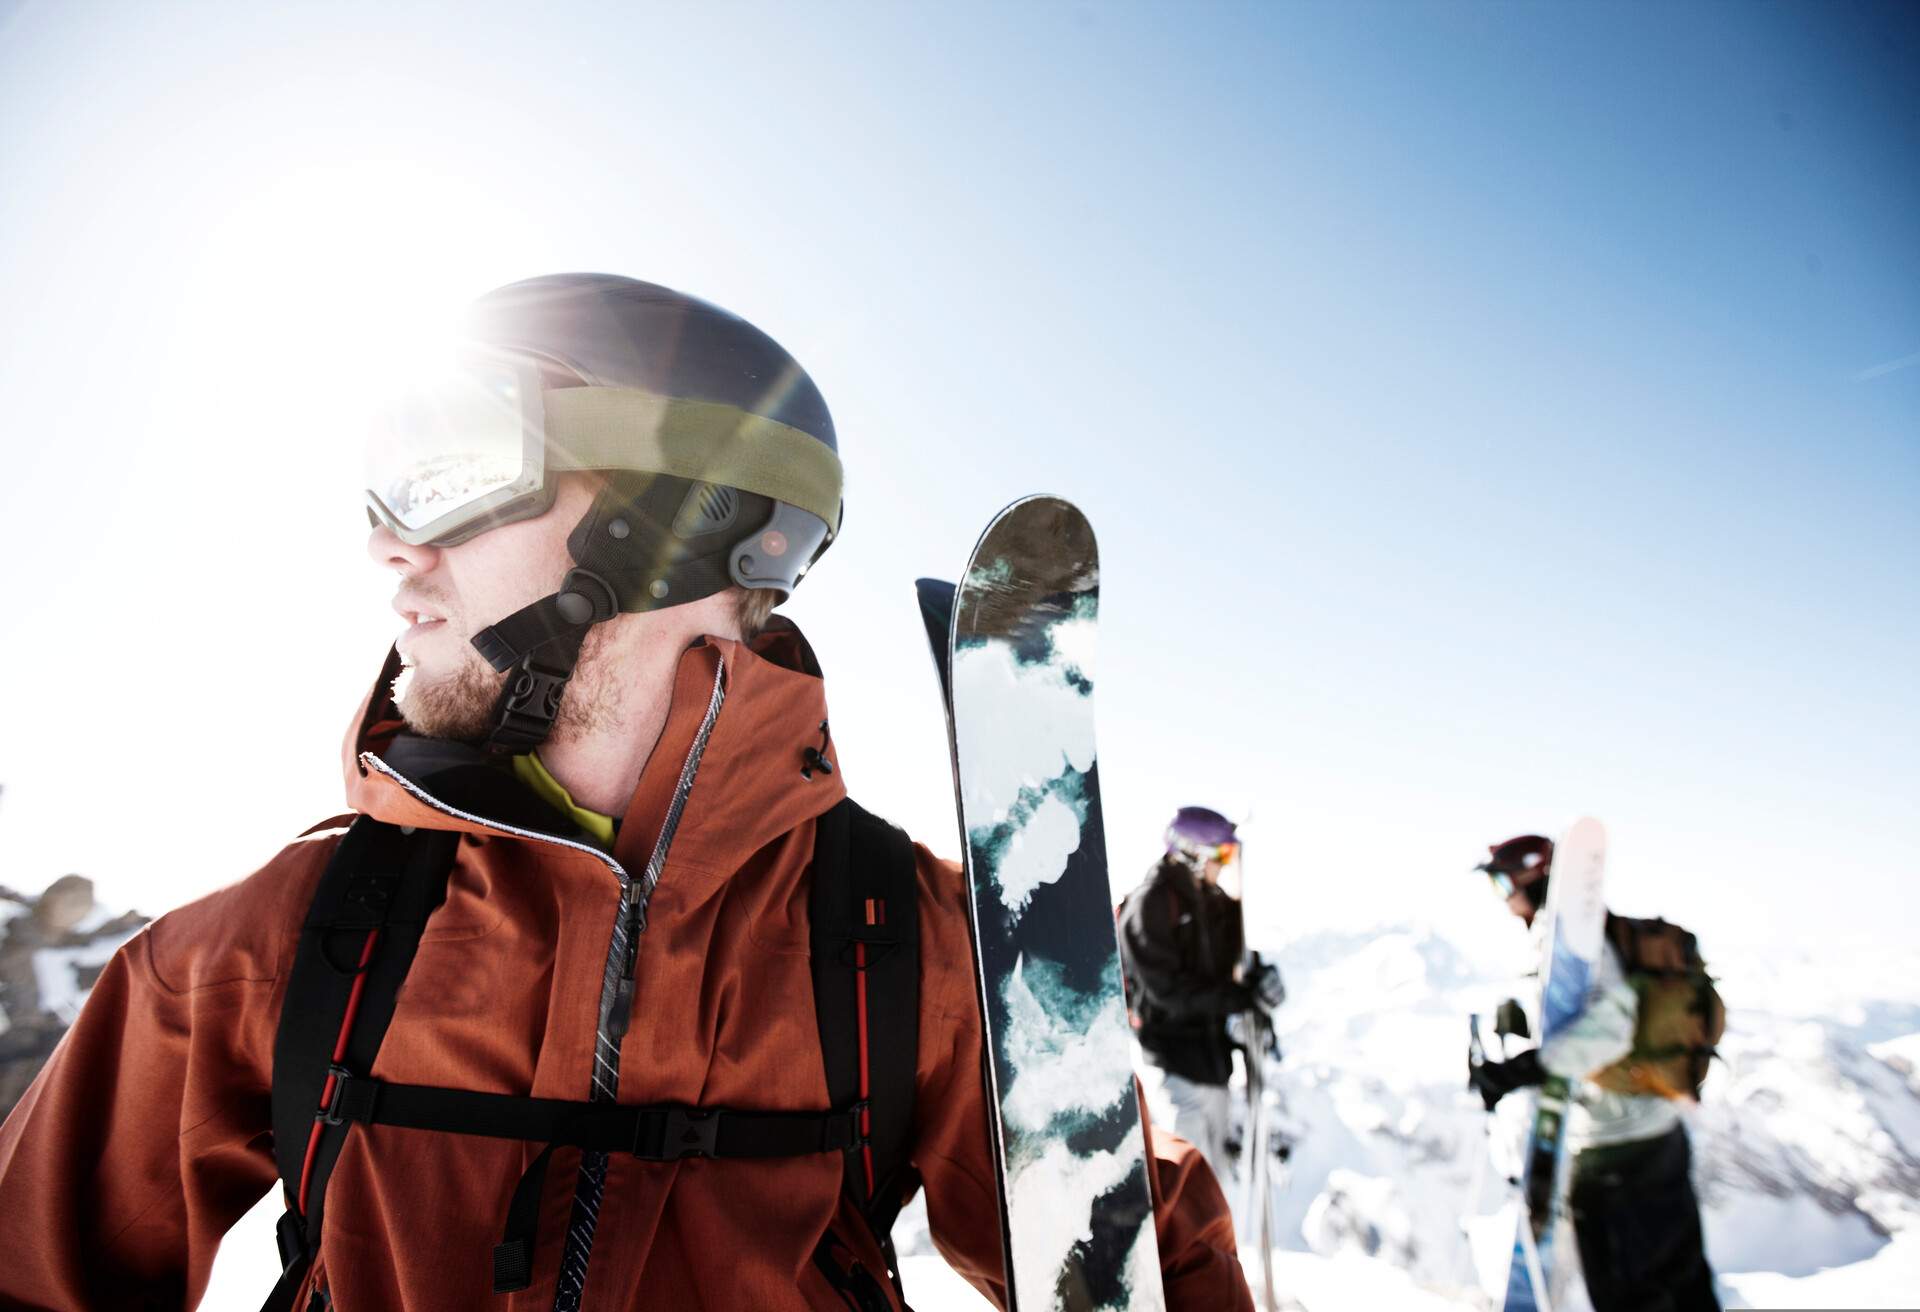 A group of skiers standing on a ski area, one in the foreground looking sideways, and two chatting in the background.